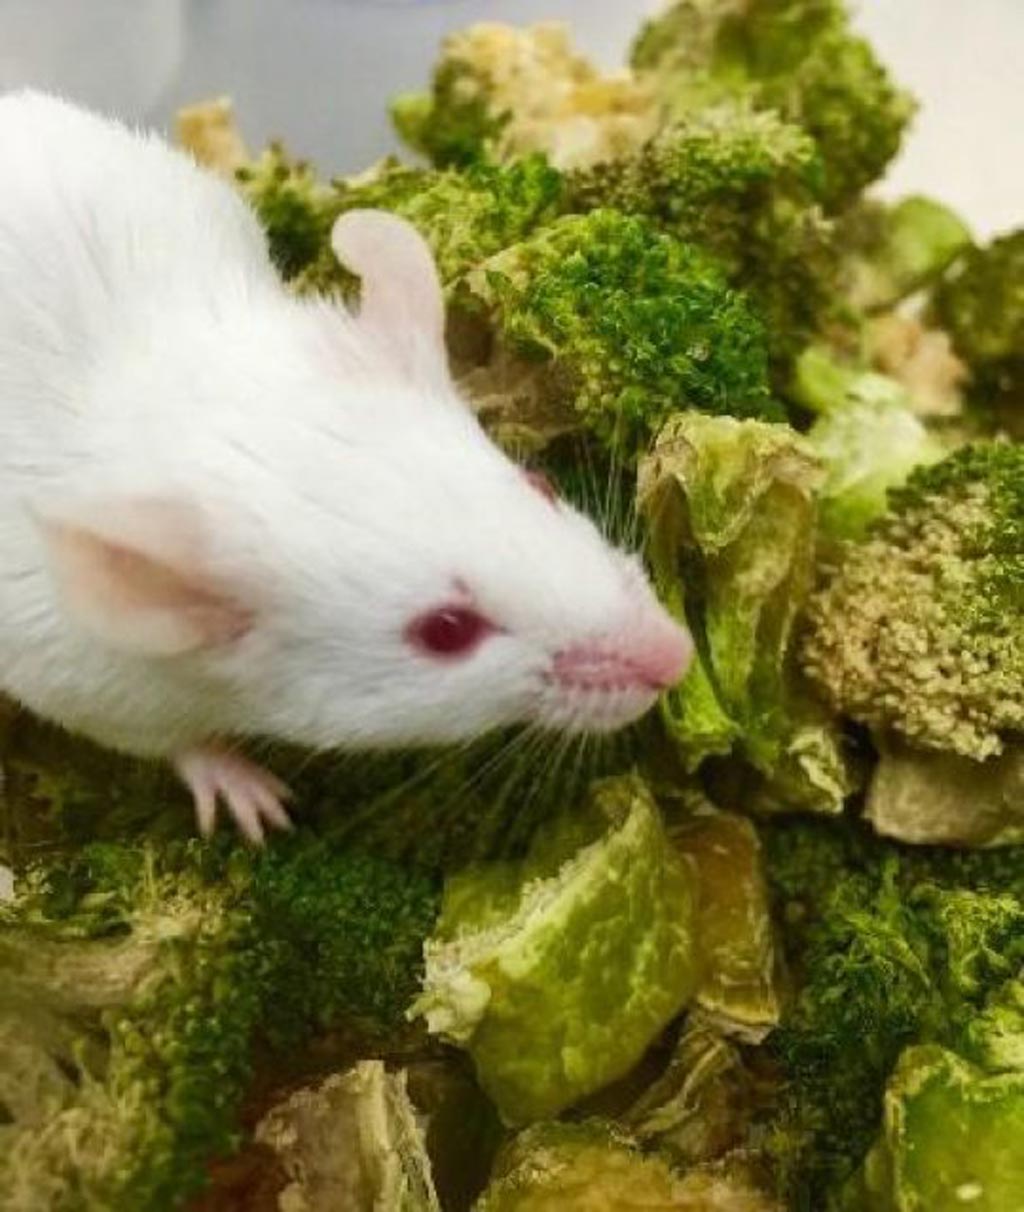 Image: Colorectal cancer was blocked in mice fed with a genetically engineered microbe and a cruciferous vegetable-rich diet (Photo courtesy of Dr. Chun-Loong Ho, National University of Singapore).